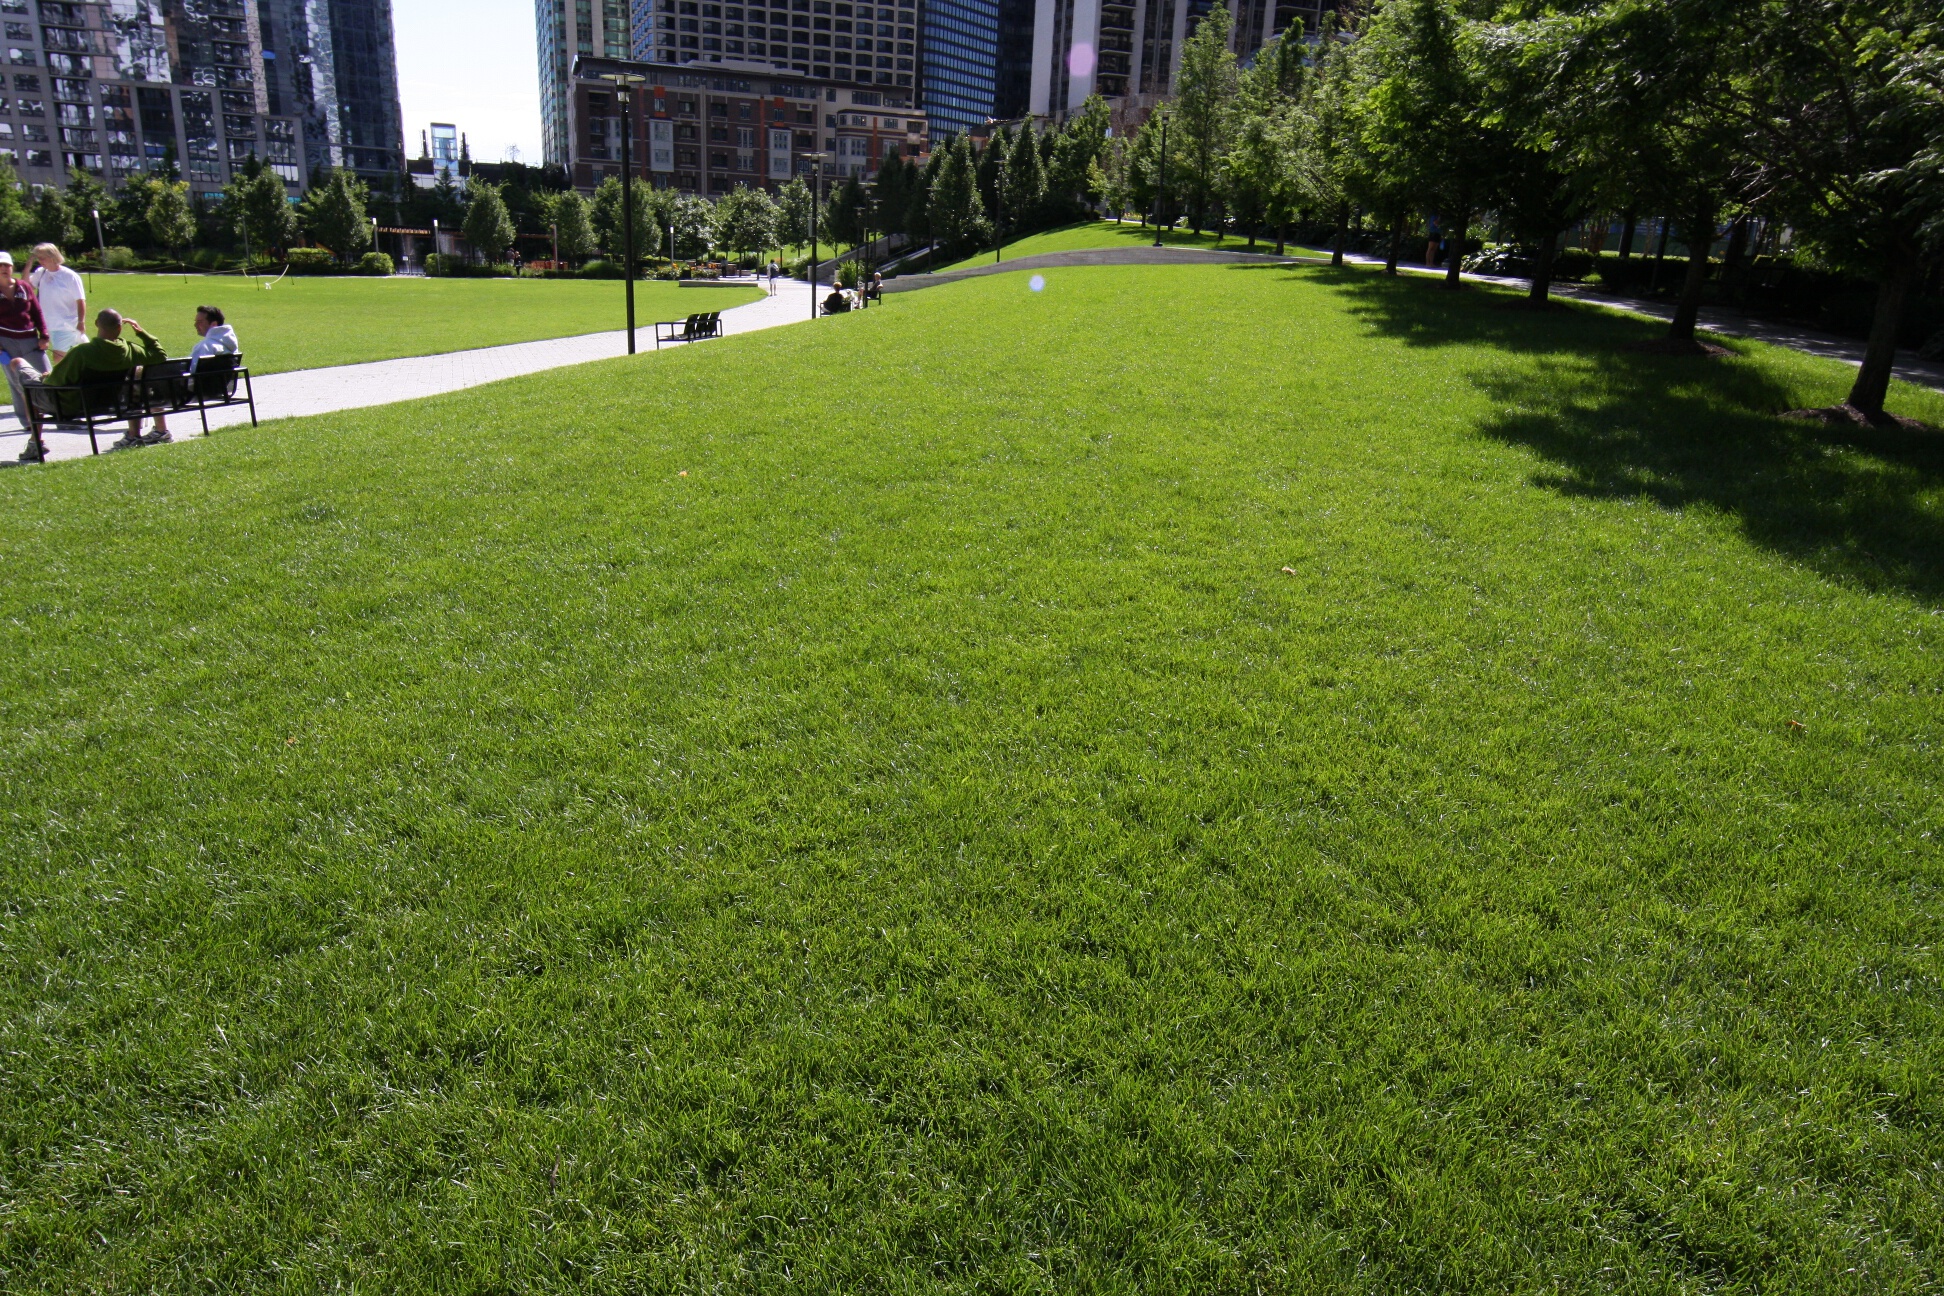 Grassy knolls in the park